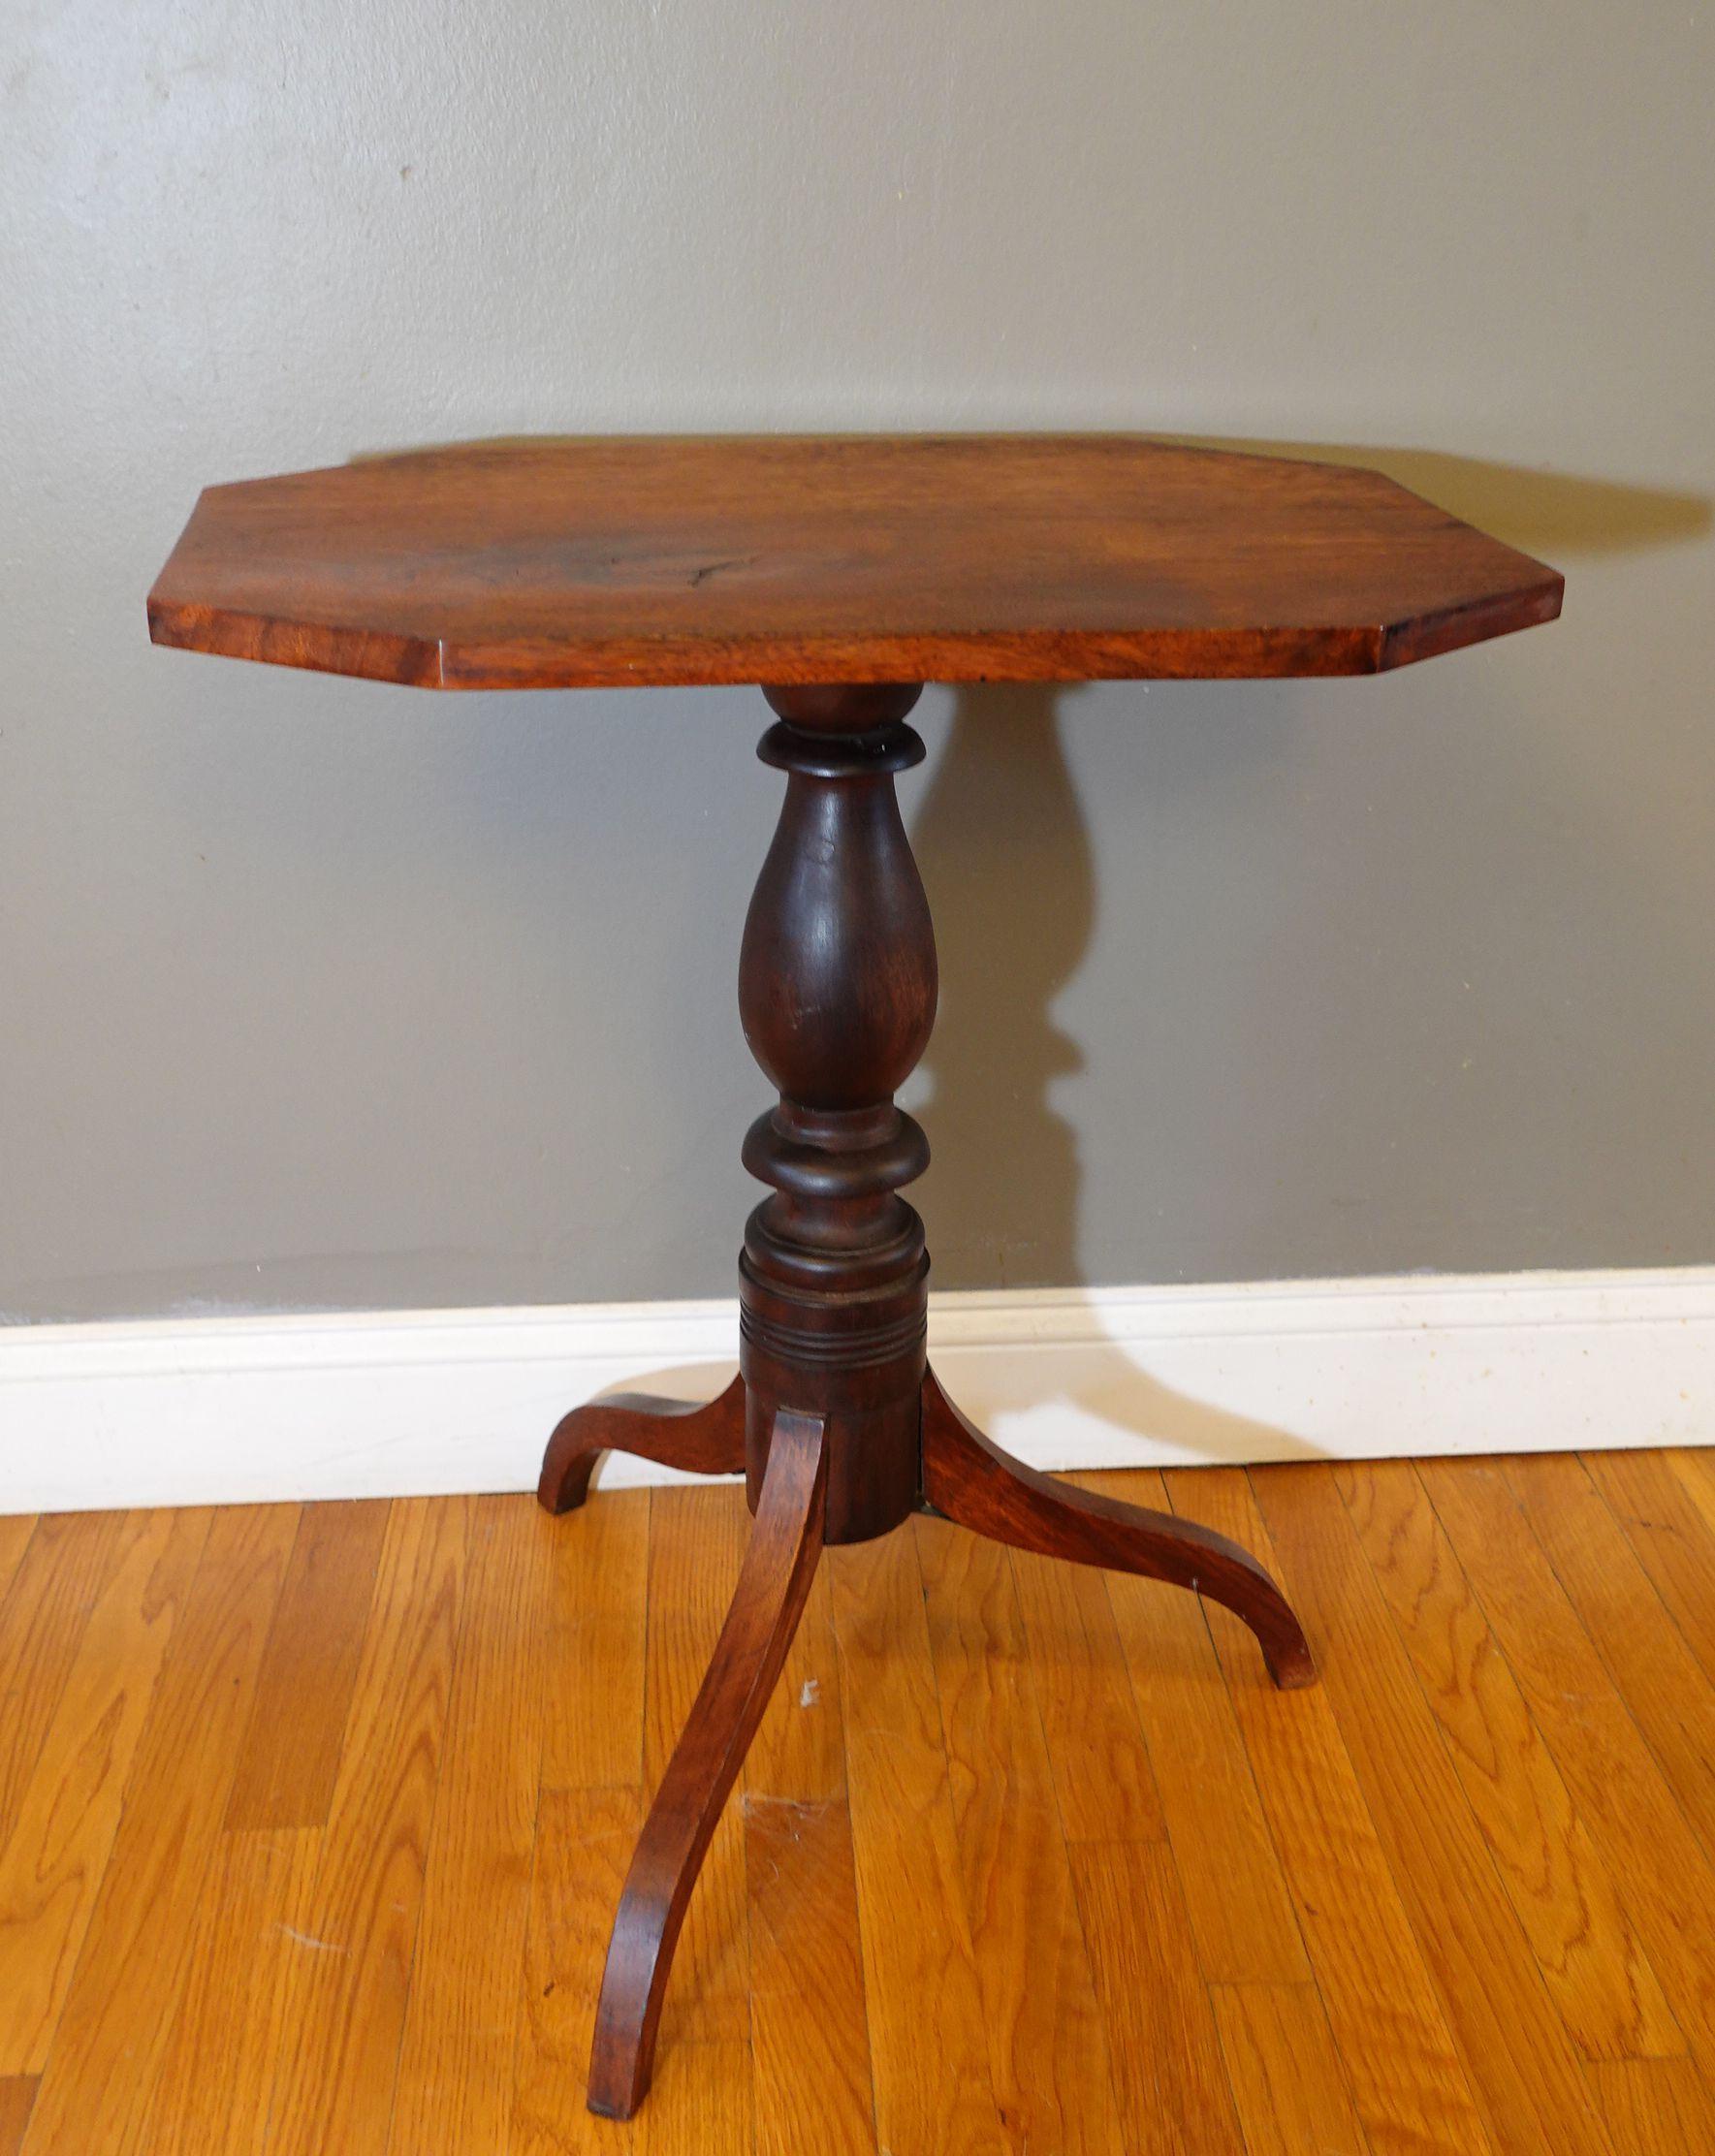 Elongated octagonal tilt top over finely turned column supported by three shapely legs.
Measures: 27 1/2